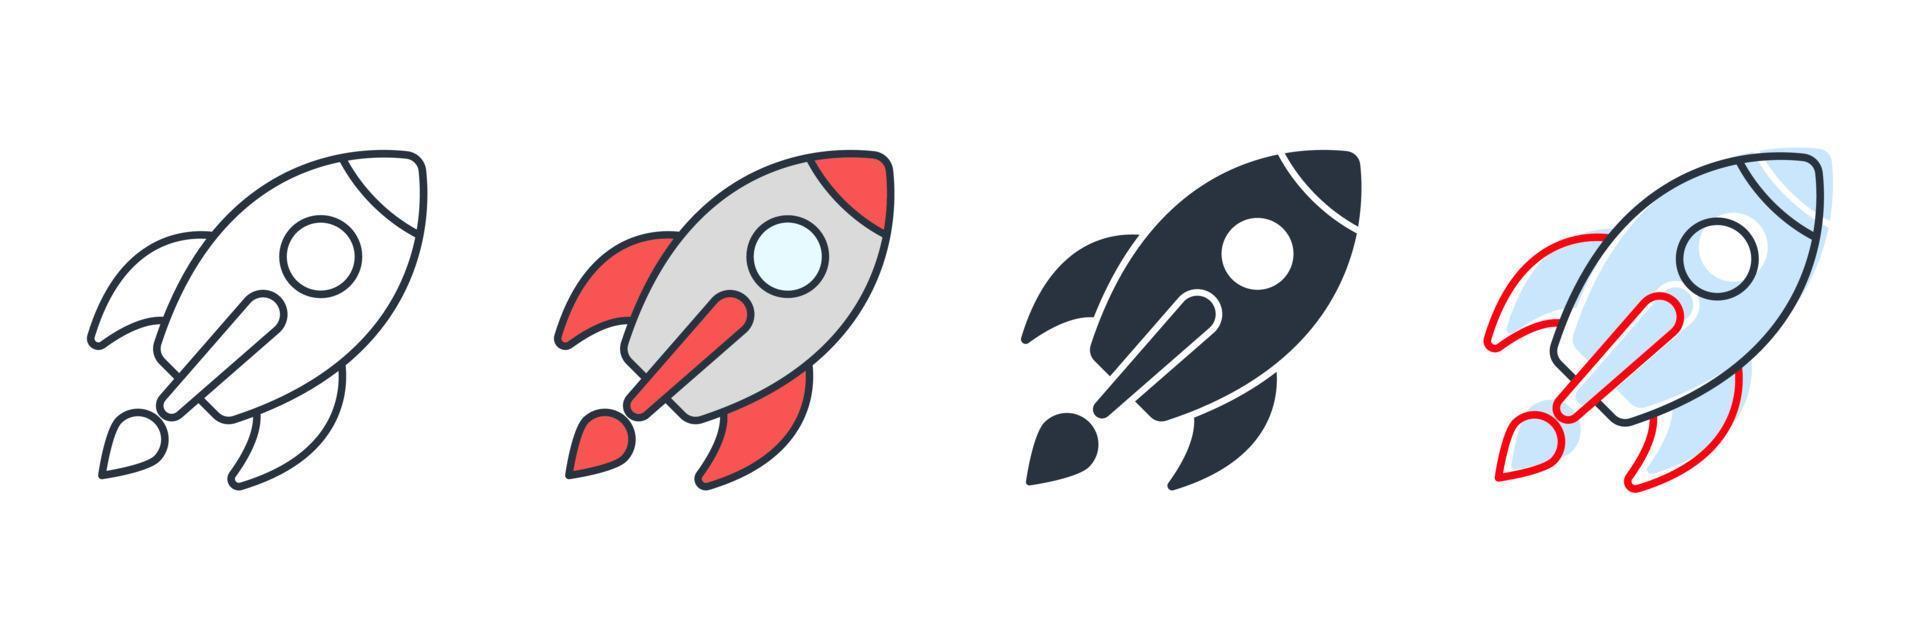 Astronautics icon logo vector illustration. rocket symbol template for graphic and web design collection